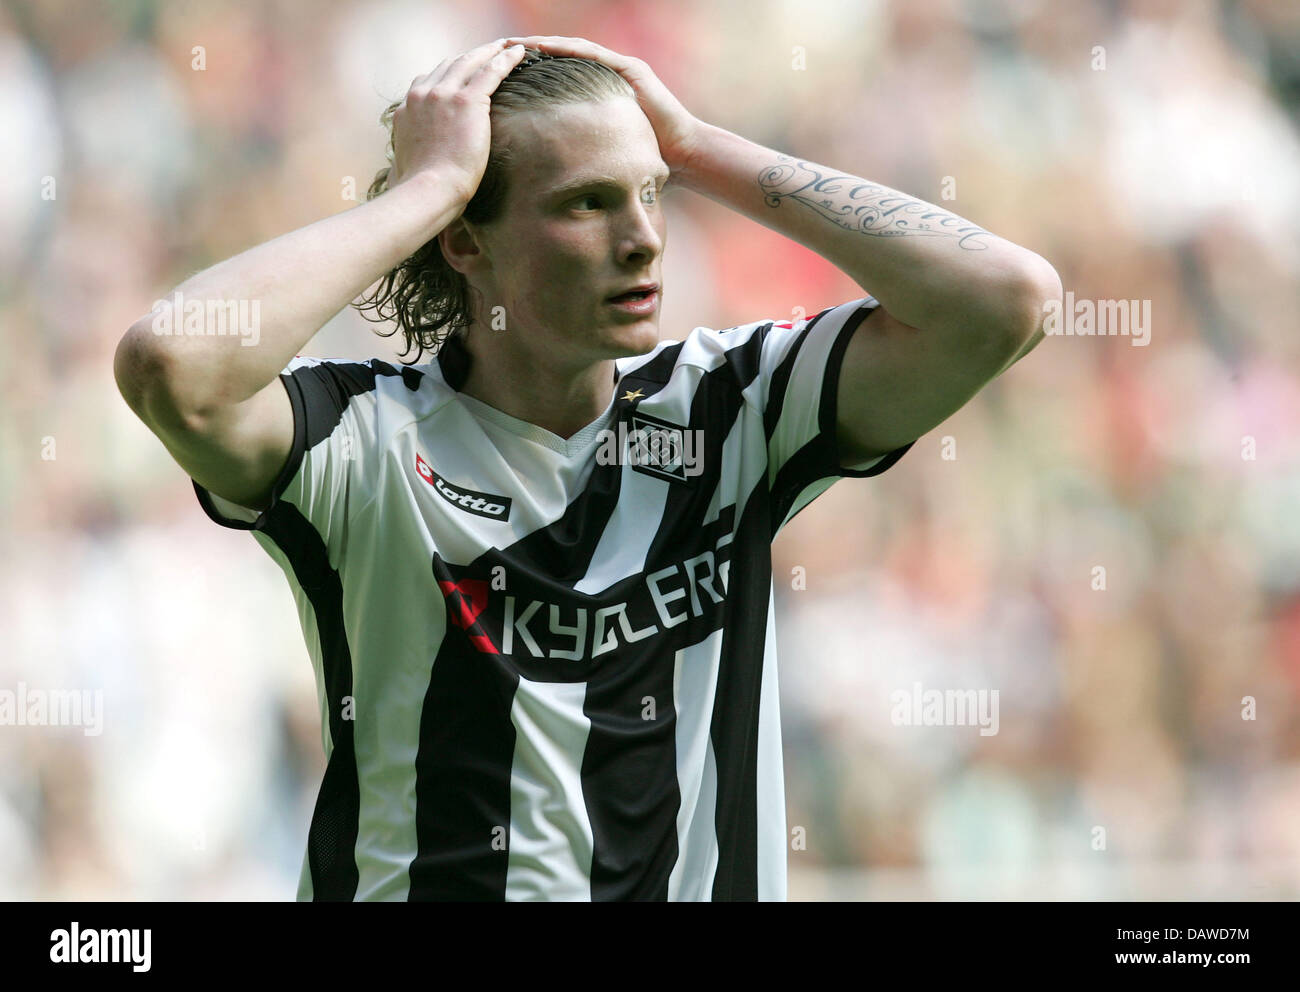 Moenchengladbach's Marcell Jansen pictured during the Bundesliga match Borussia Moenchengladbach v Eintracht Frankfurt at the Borussia Park of Moenchengladbach, Germany, Saturday, 31 March 2007. The match ended in a 1-1 draw. Photo: Rolf Vennenbernd (ATTENTION: BLOCKING PERIOD! The DFL permits the further utilisation of the pictures in IPTV, mobile services and other new technologi Stock Photo